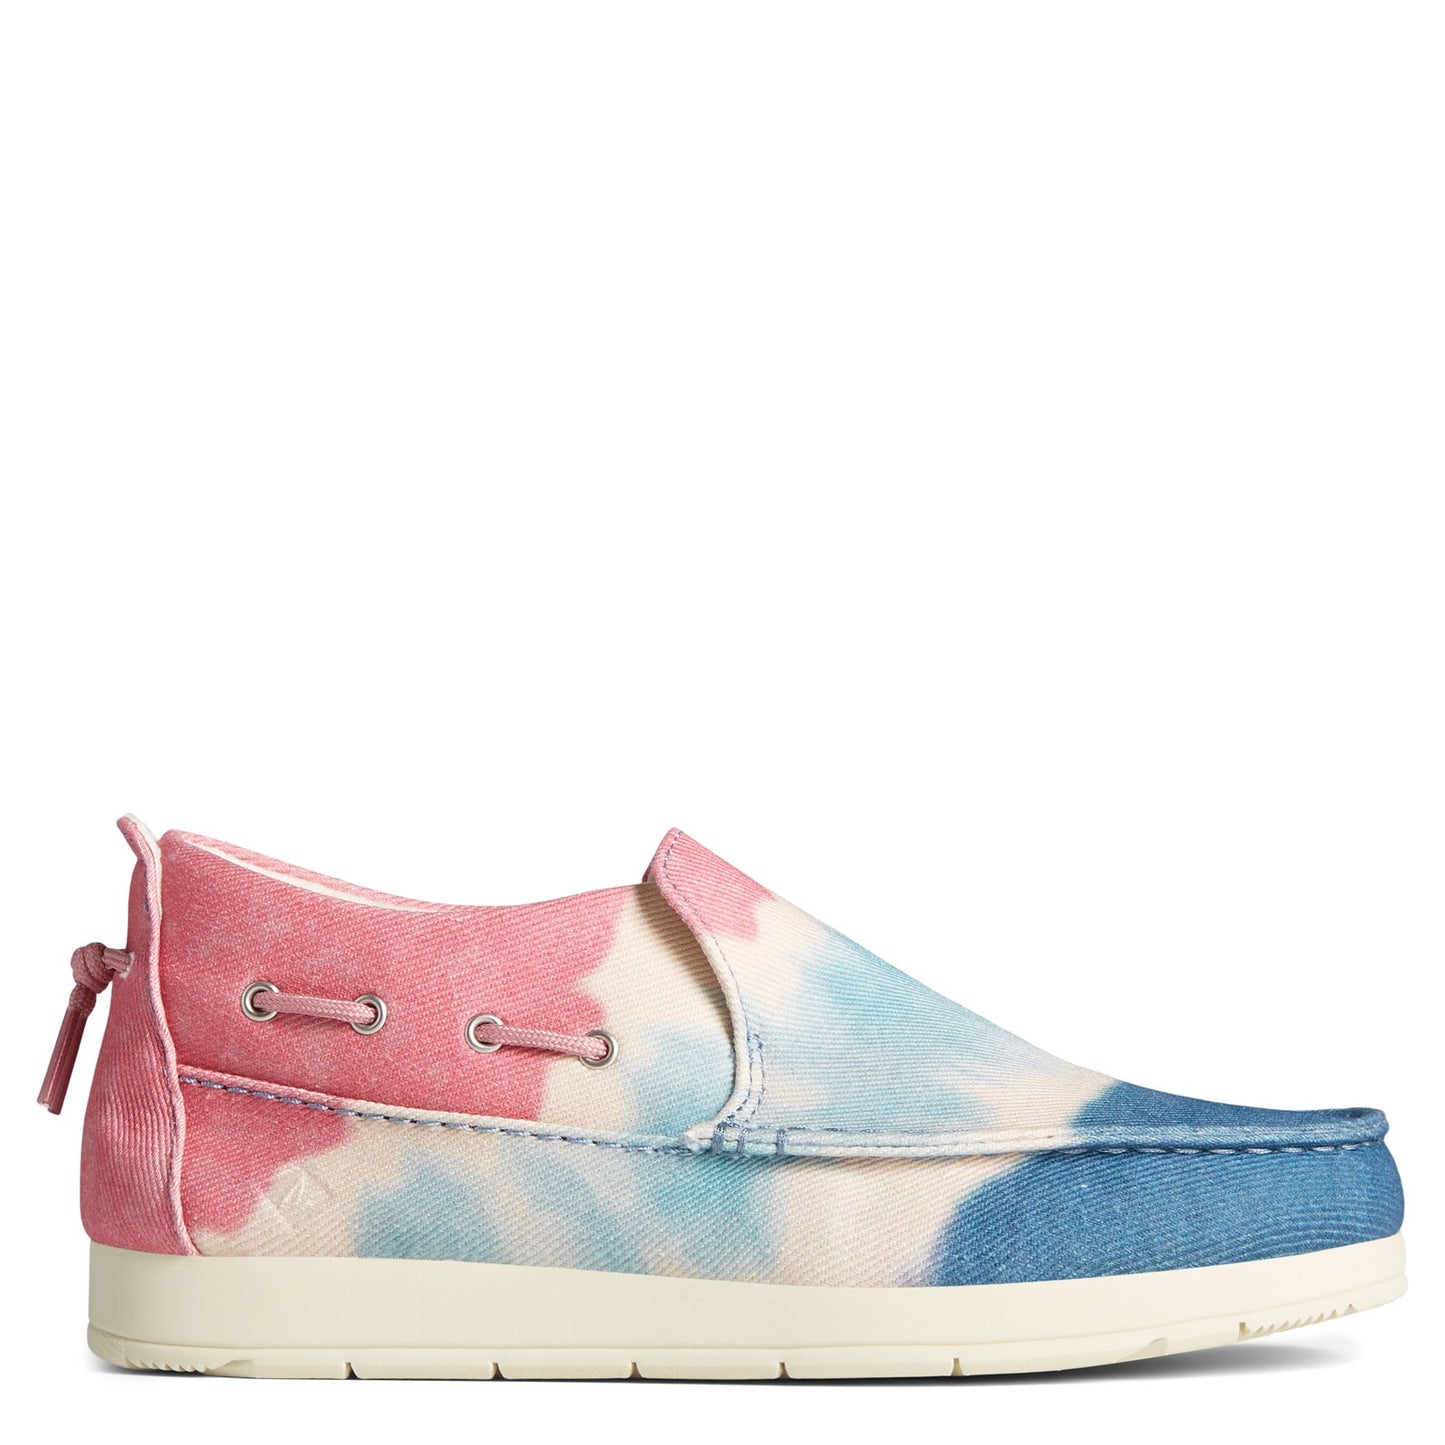 Peltz Shoes  Women's Sperry Moc-Sider Canvas Slip-On BLUE PINK STS87053